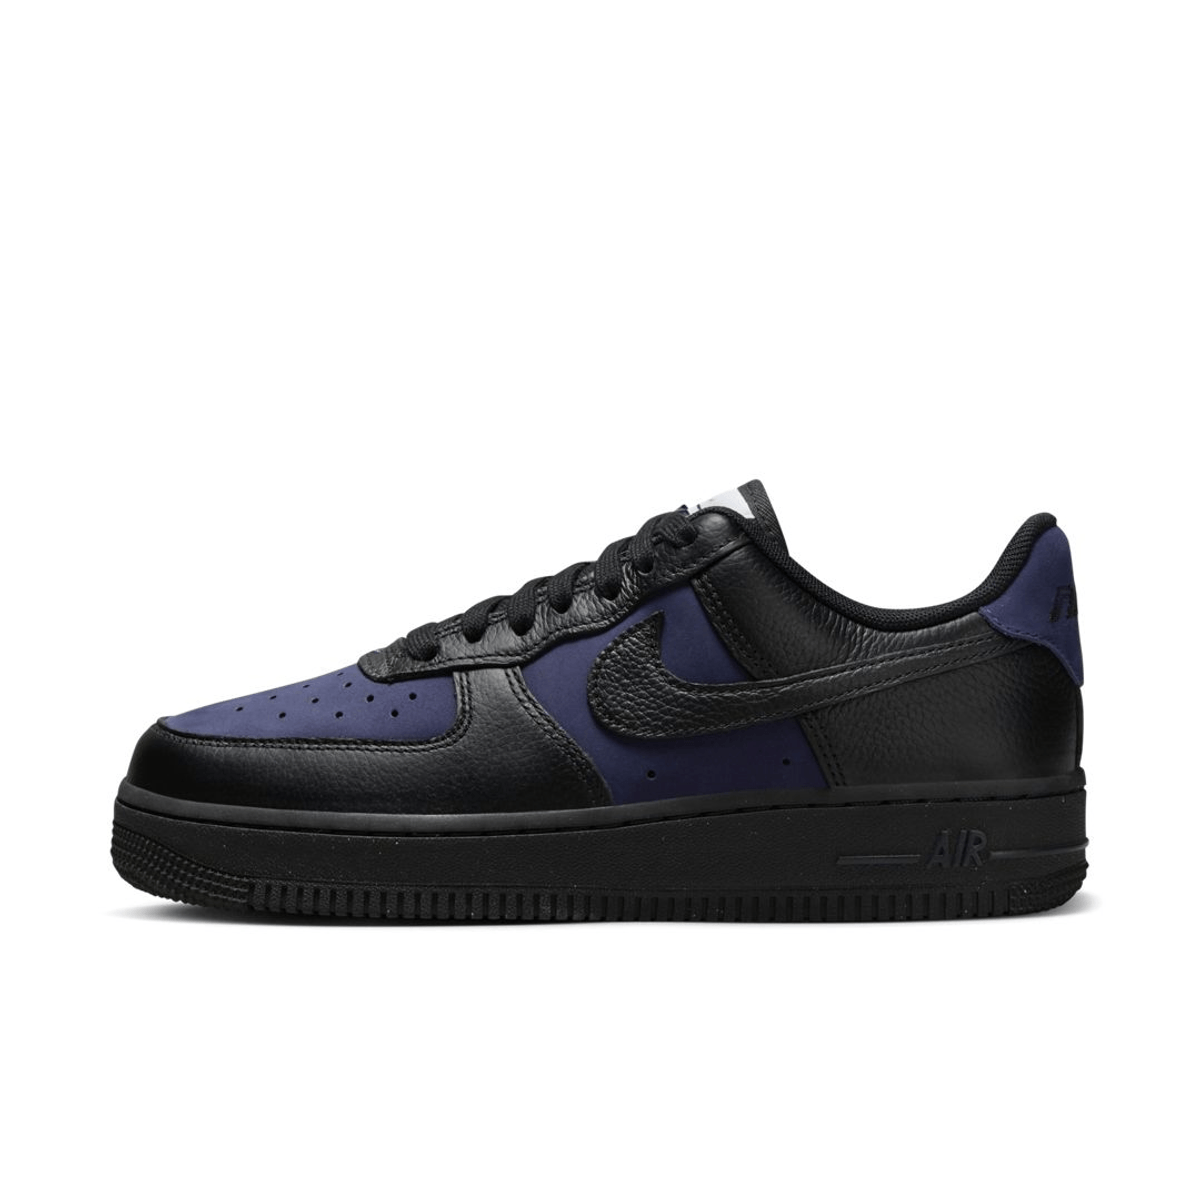 First Look At The Nike Air Force 1 Low "Black/Indigo"